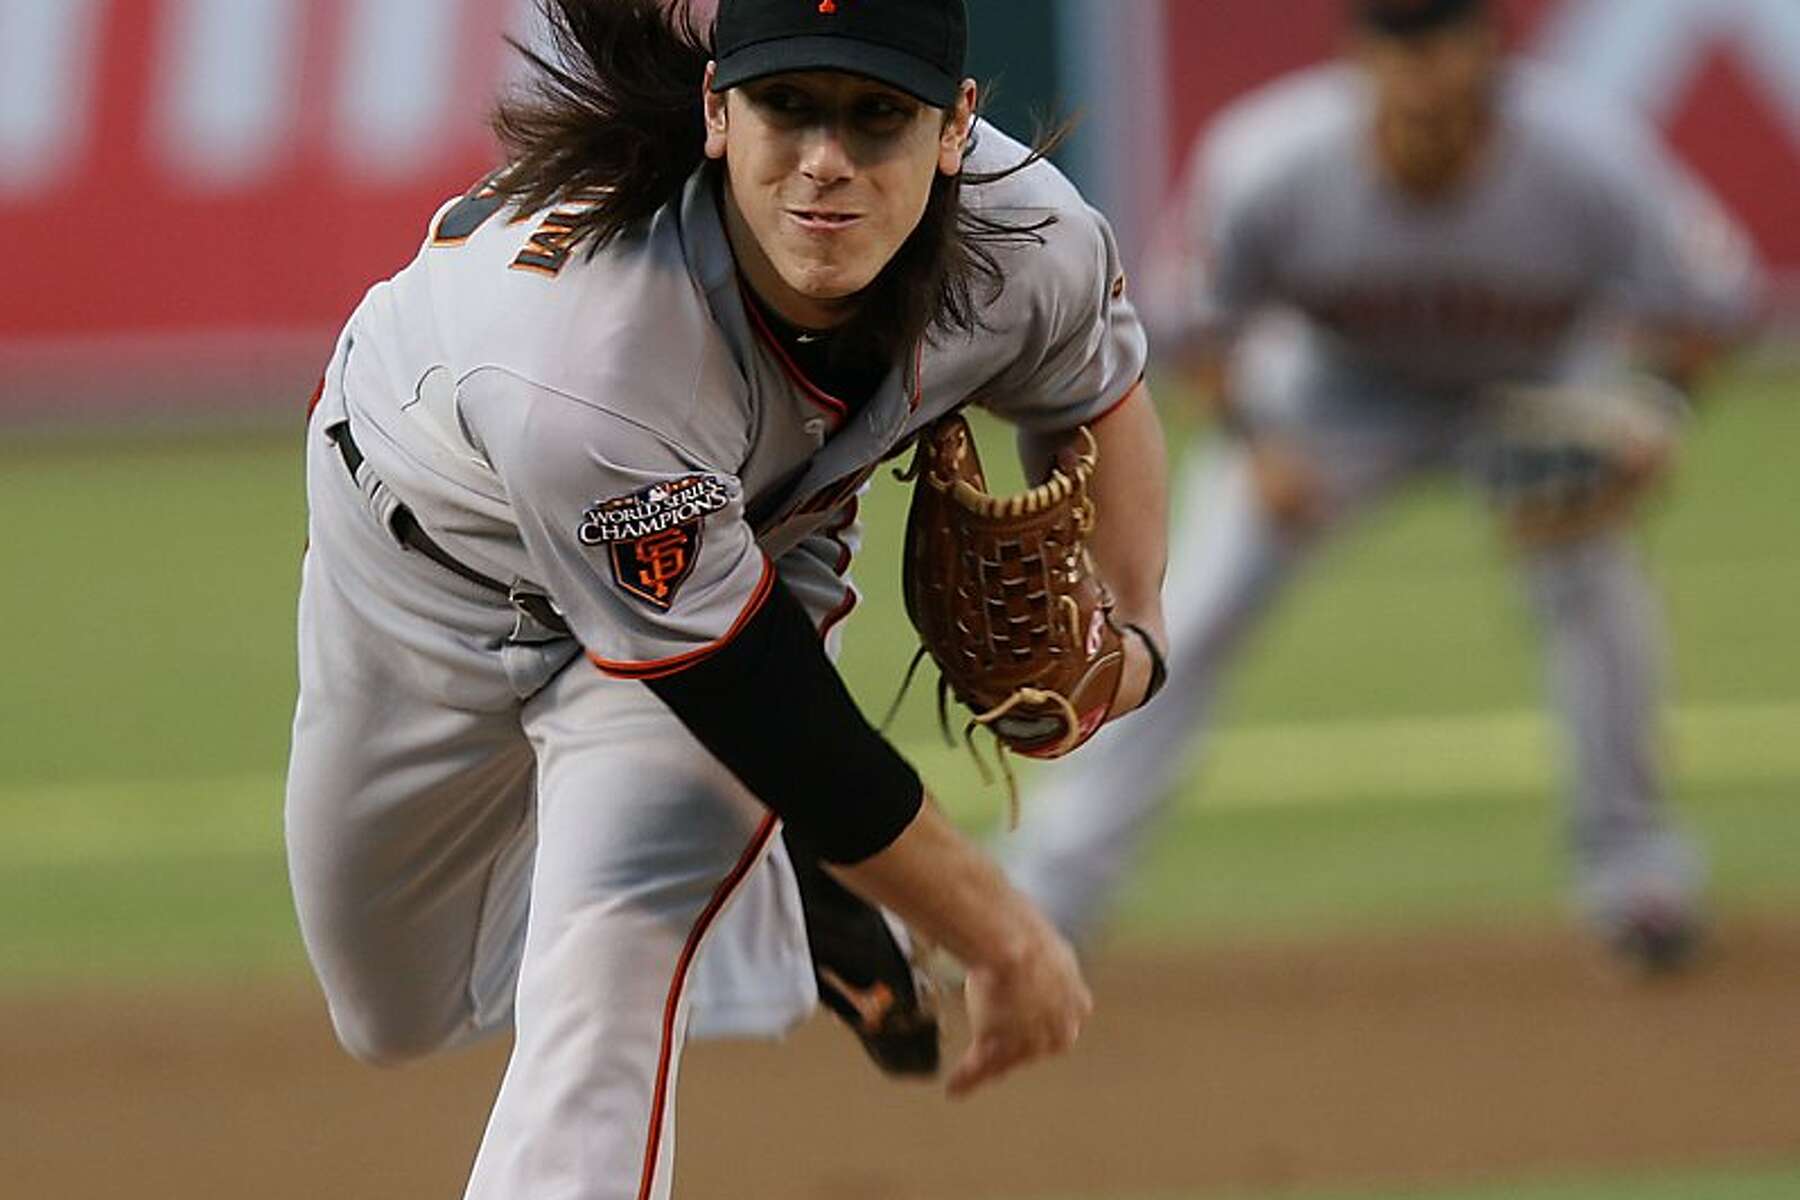 The most epic arbitration story of Tim Lincecum